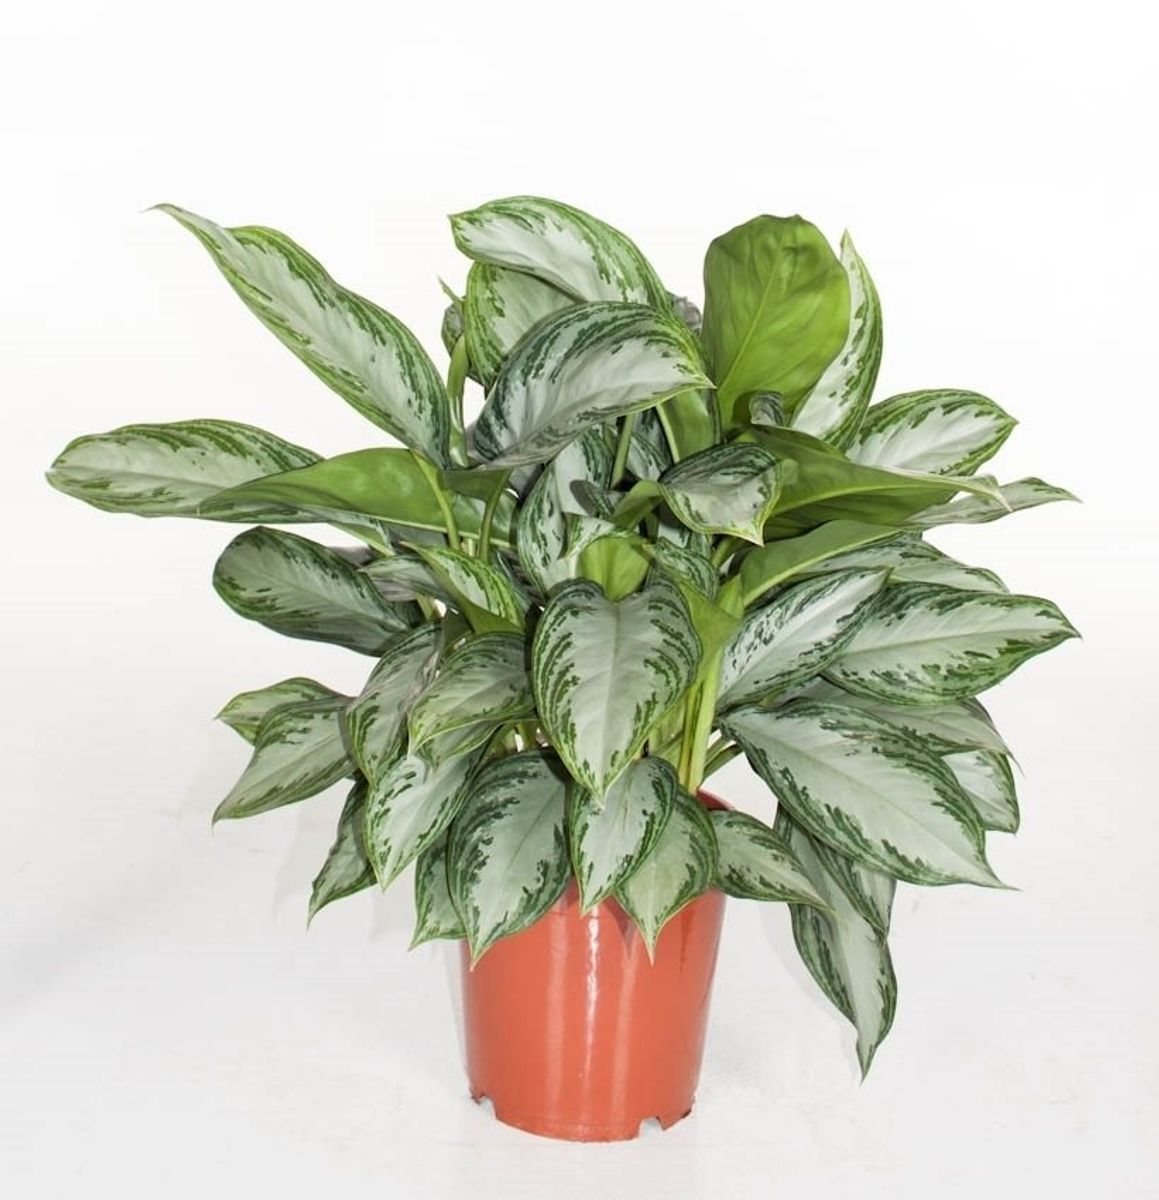 Aglaonema Silver Bay P24 Cm H60 Cm Plant Wholesale Floraccess,Handwriting Jobs From Home